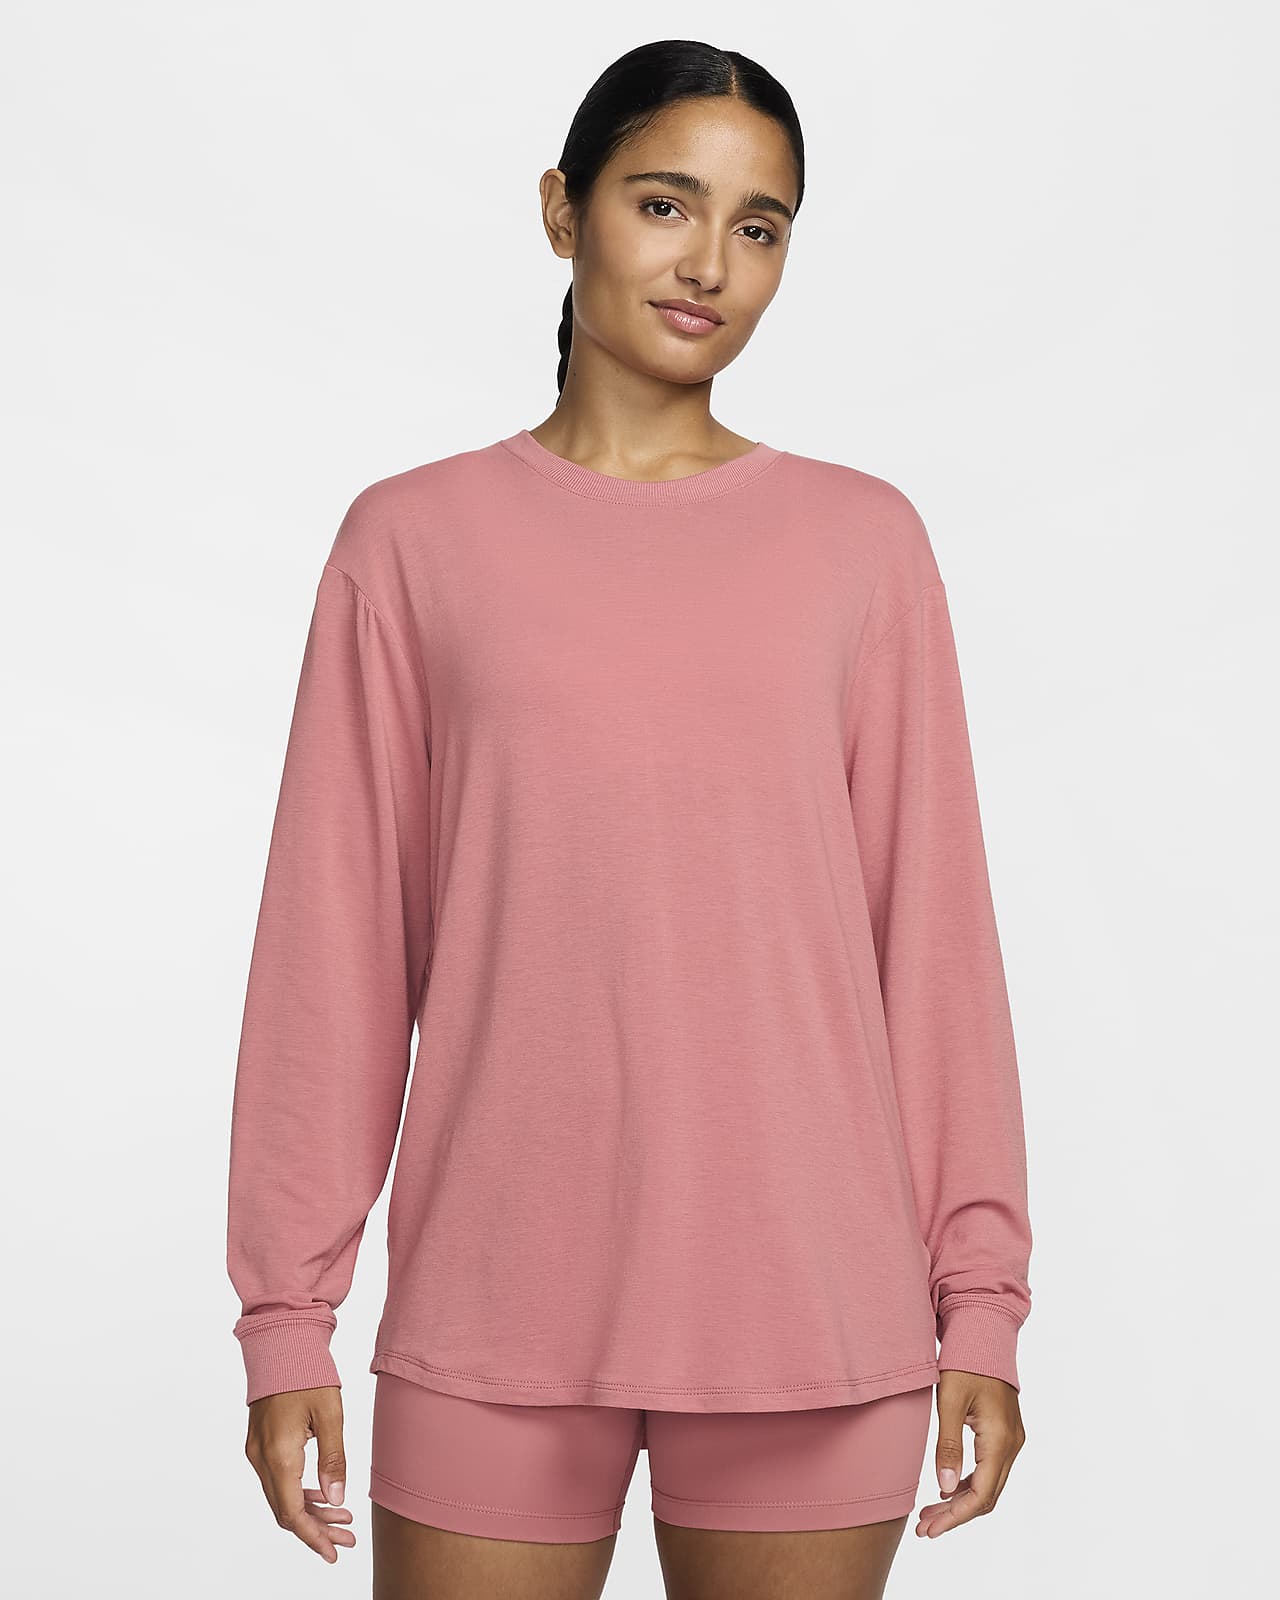 Nike One Relaxed Women's Dri-FIT Long-Sleeve Top